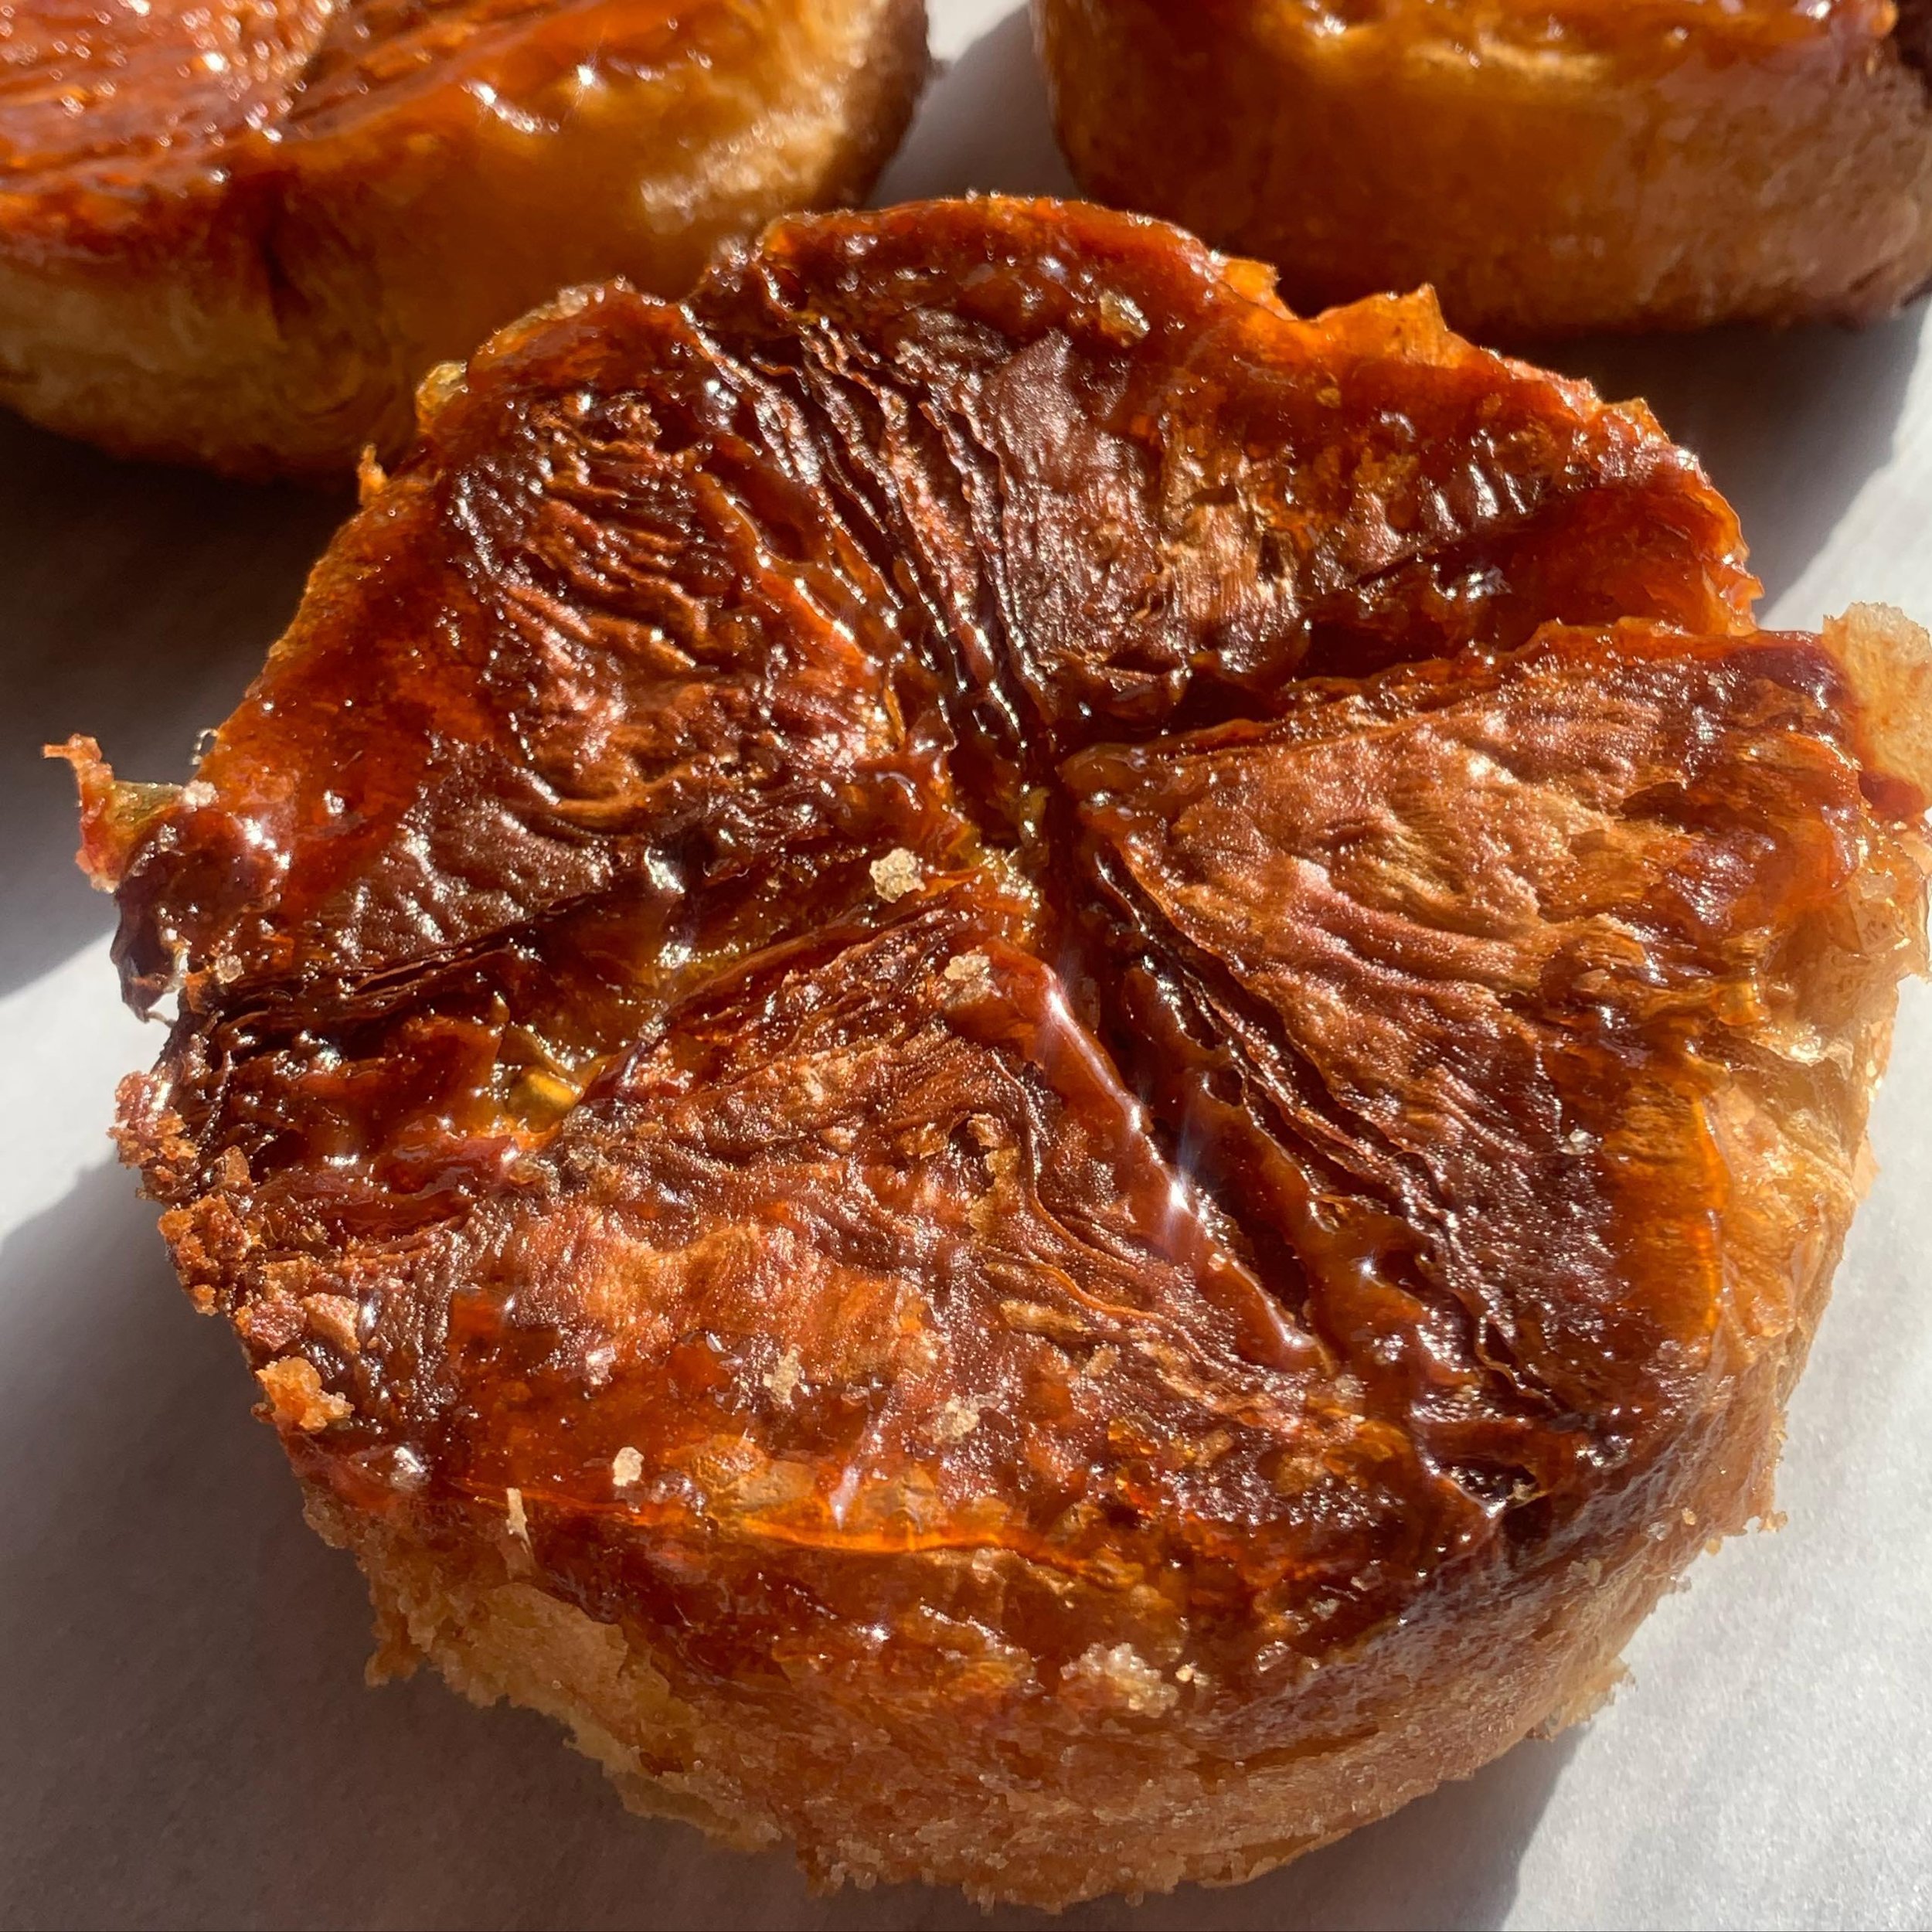 Coconut kouign amann

Flakey, caramelized dough filled with a chewy coconut caramel